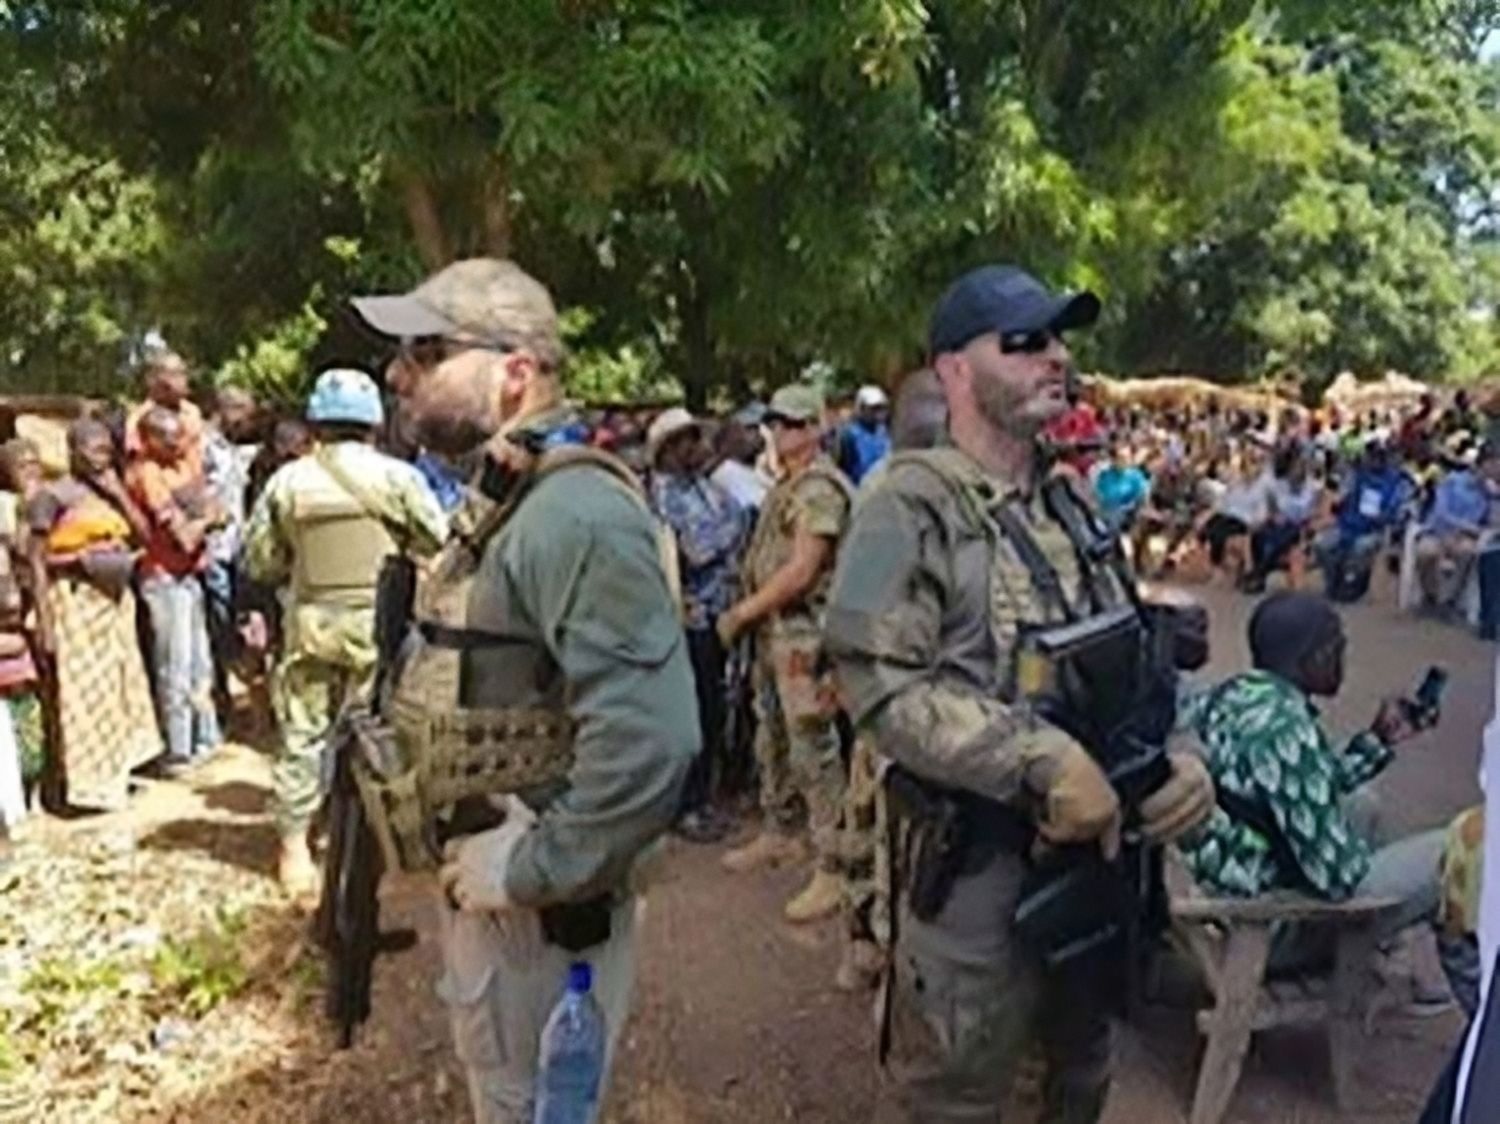 Russian mercenaries in Koundili, in Ouham-Pendé, on May 25, 2019 during the official visit of a delegation from Bangui after the killing in the region by 3R rebels